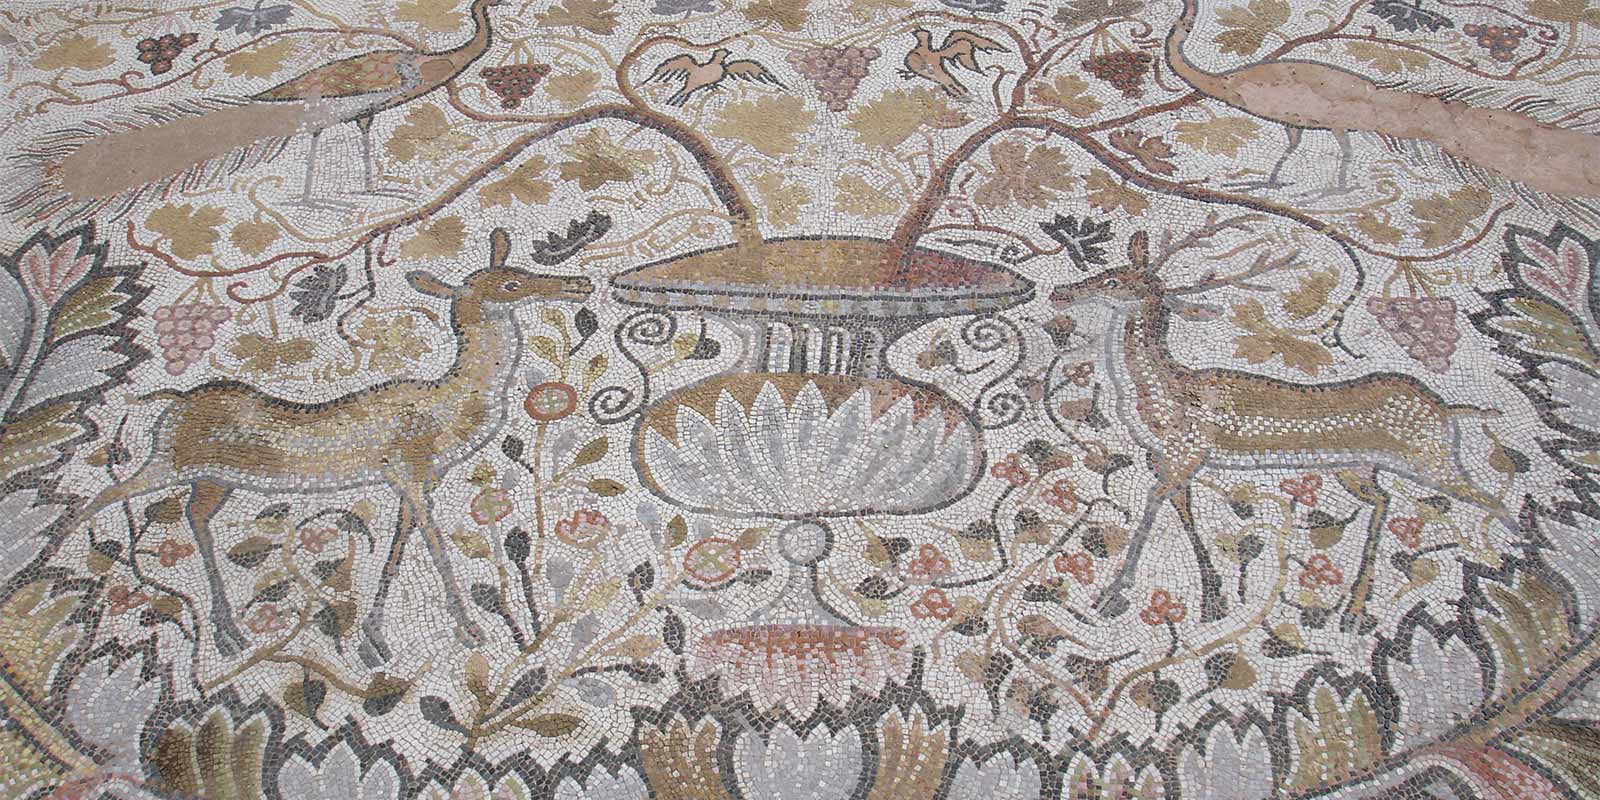 Heraclea mosaic archaeology in Bitola